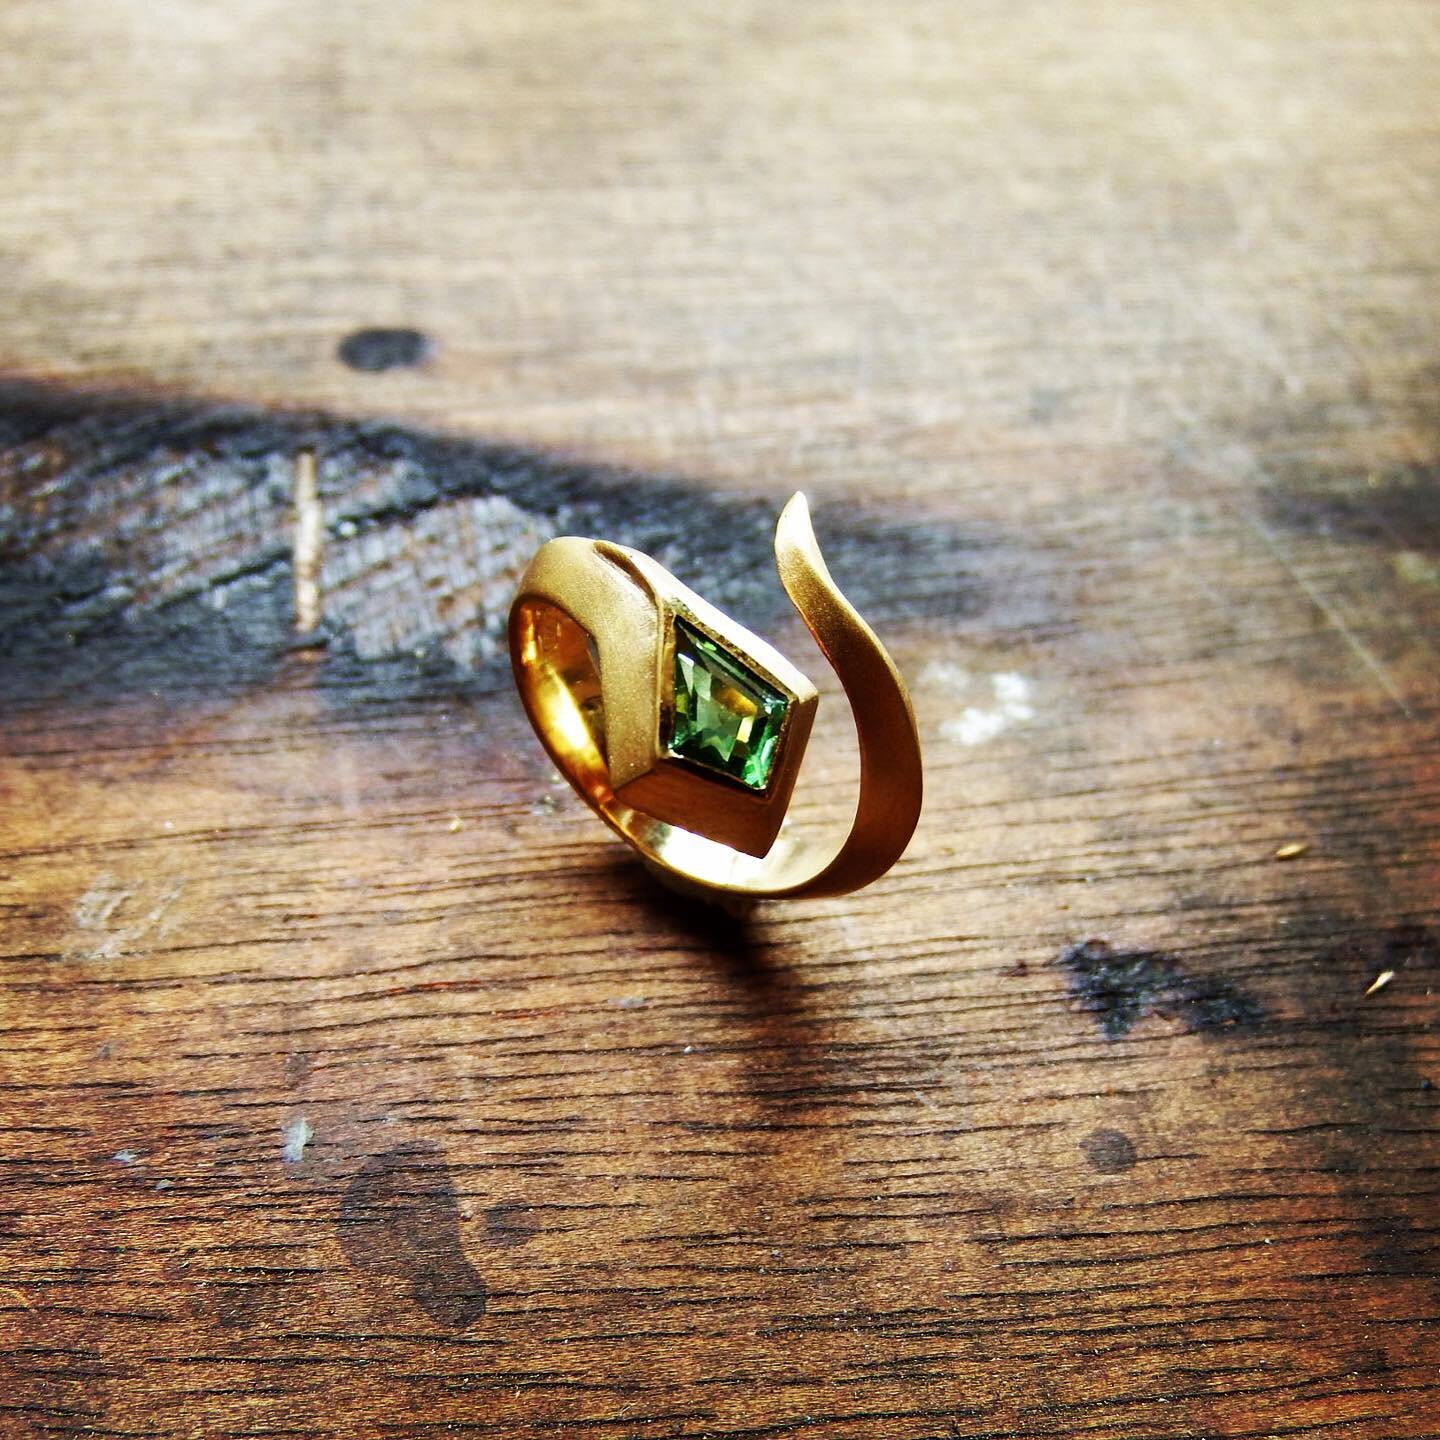 The next piece in the collection is a handmade 1 off. Beautiful 18ct yellow gold with a satin finish and set with a Venomous green Tourmaline.

#pierscarpenterjewellery #handmade #handmadeuk #tourmaline #18ctgold #ring #handmadejewellery #goldsmith #